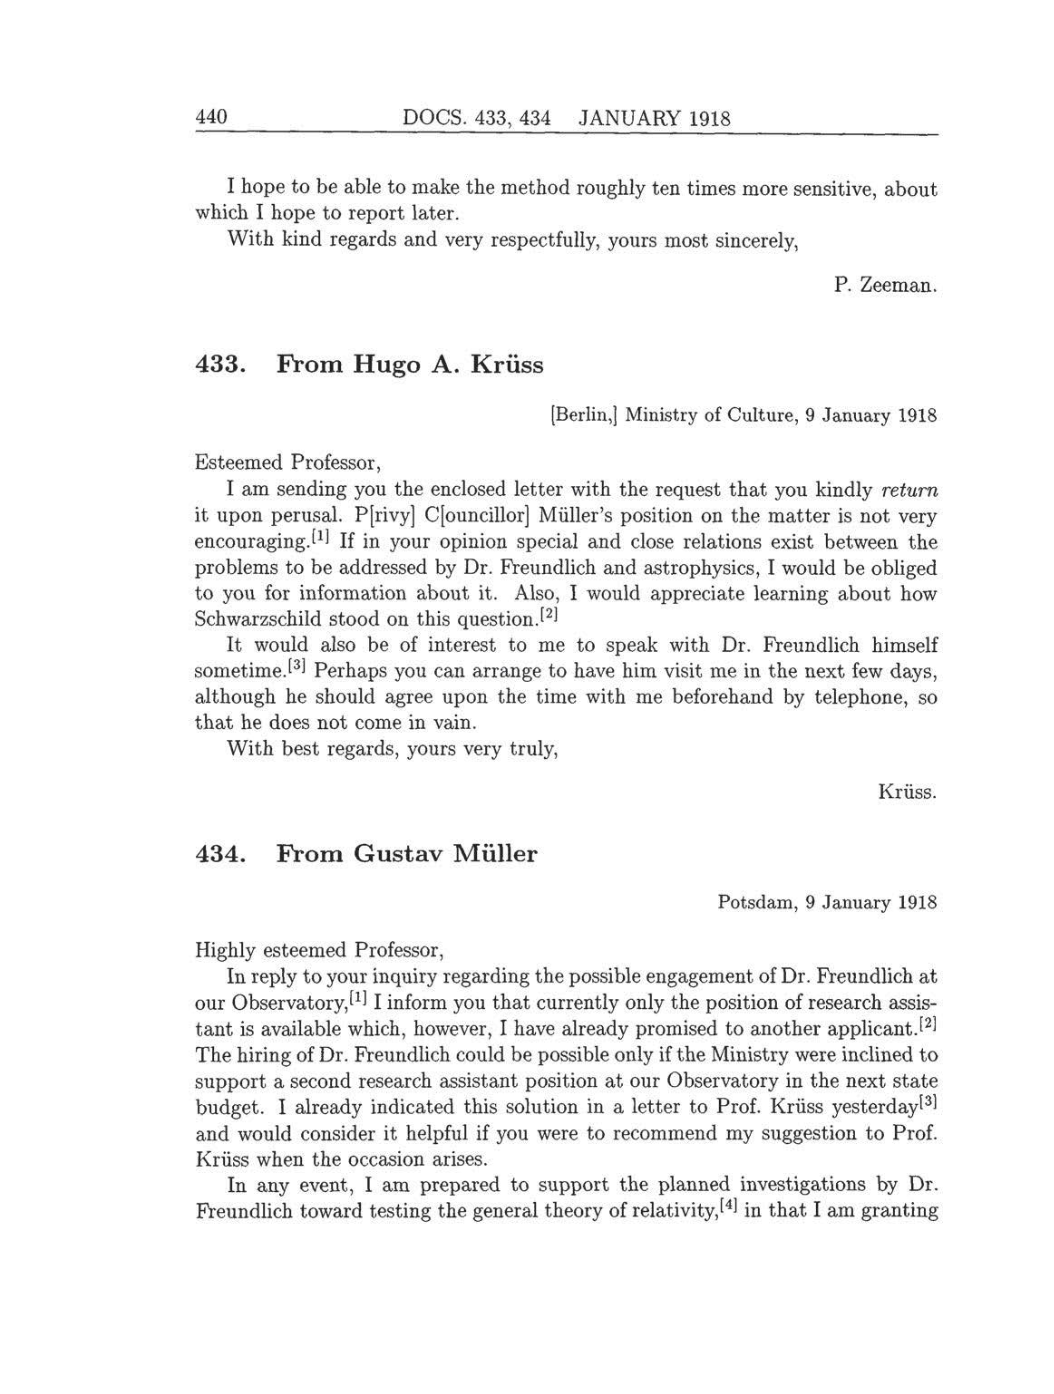 Volume 8: The Berlin Years: Correspondence, 1914-1918 (English translation supplement) page 440